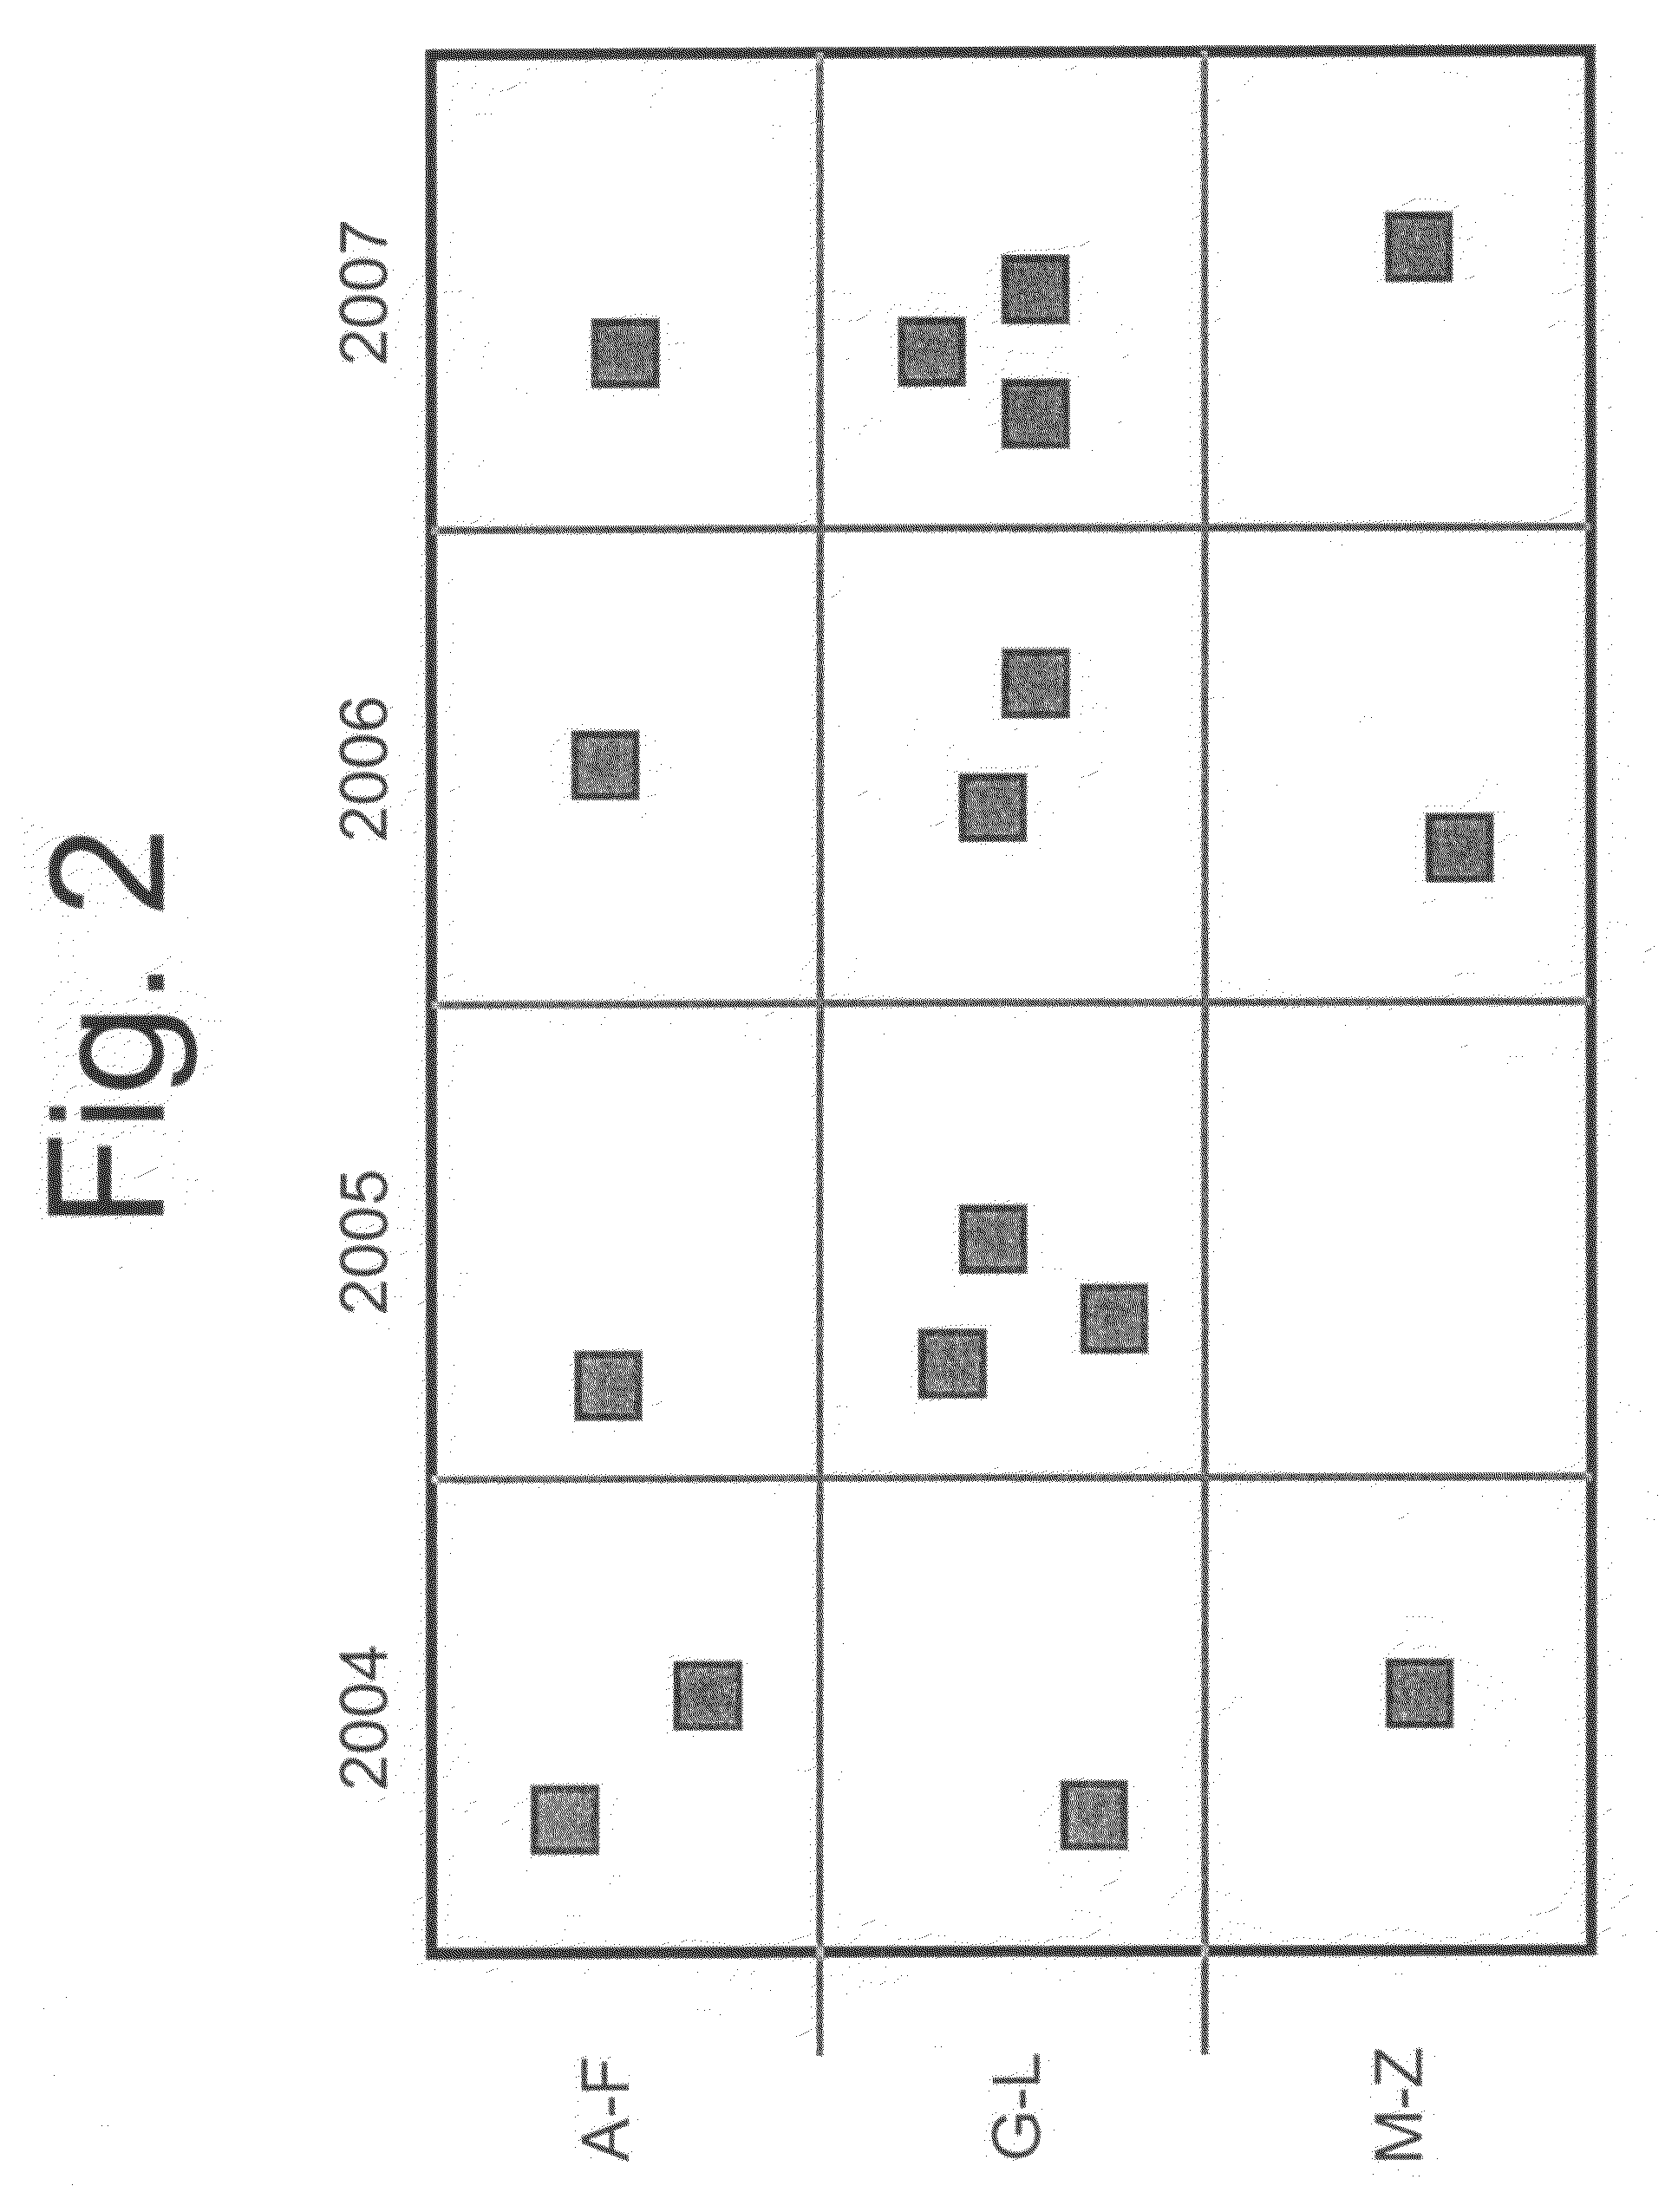 Method for improving search efficiency in enterprise search system